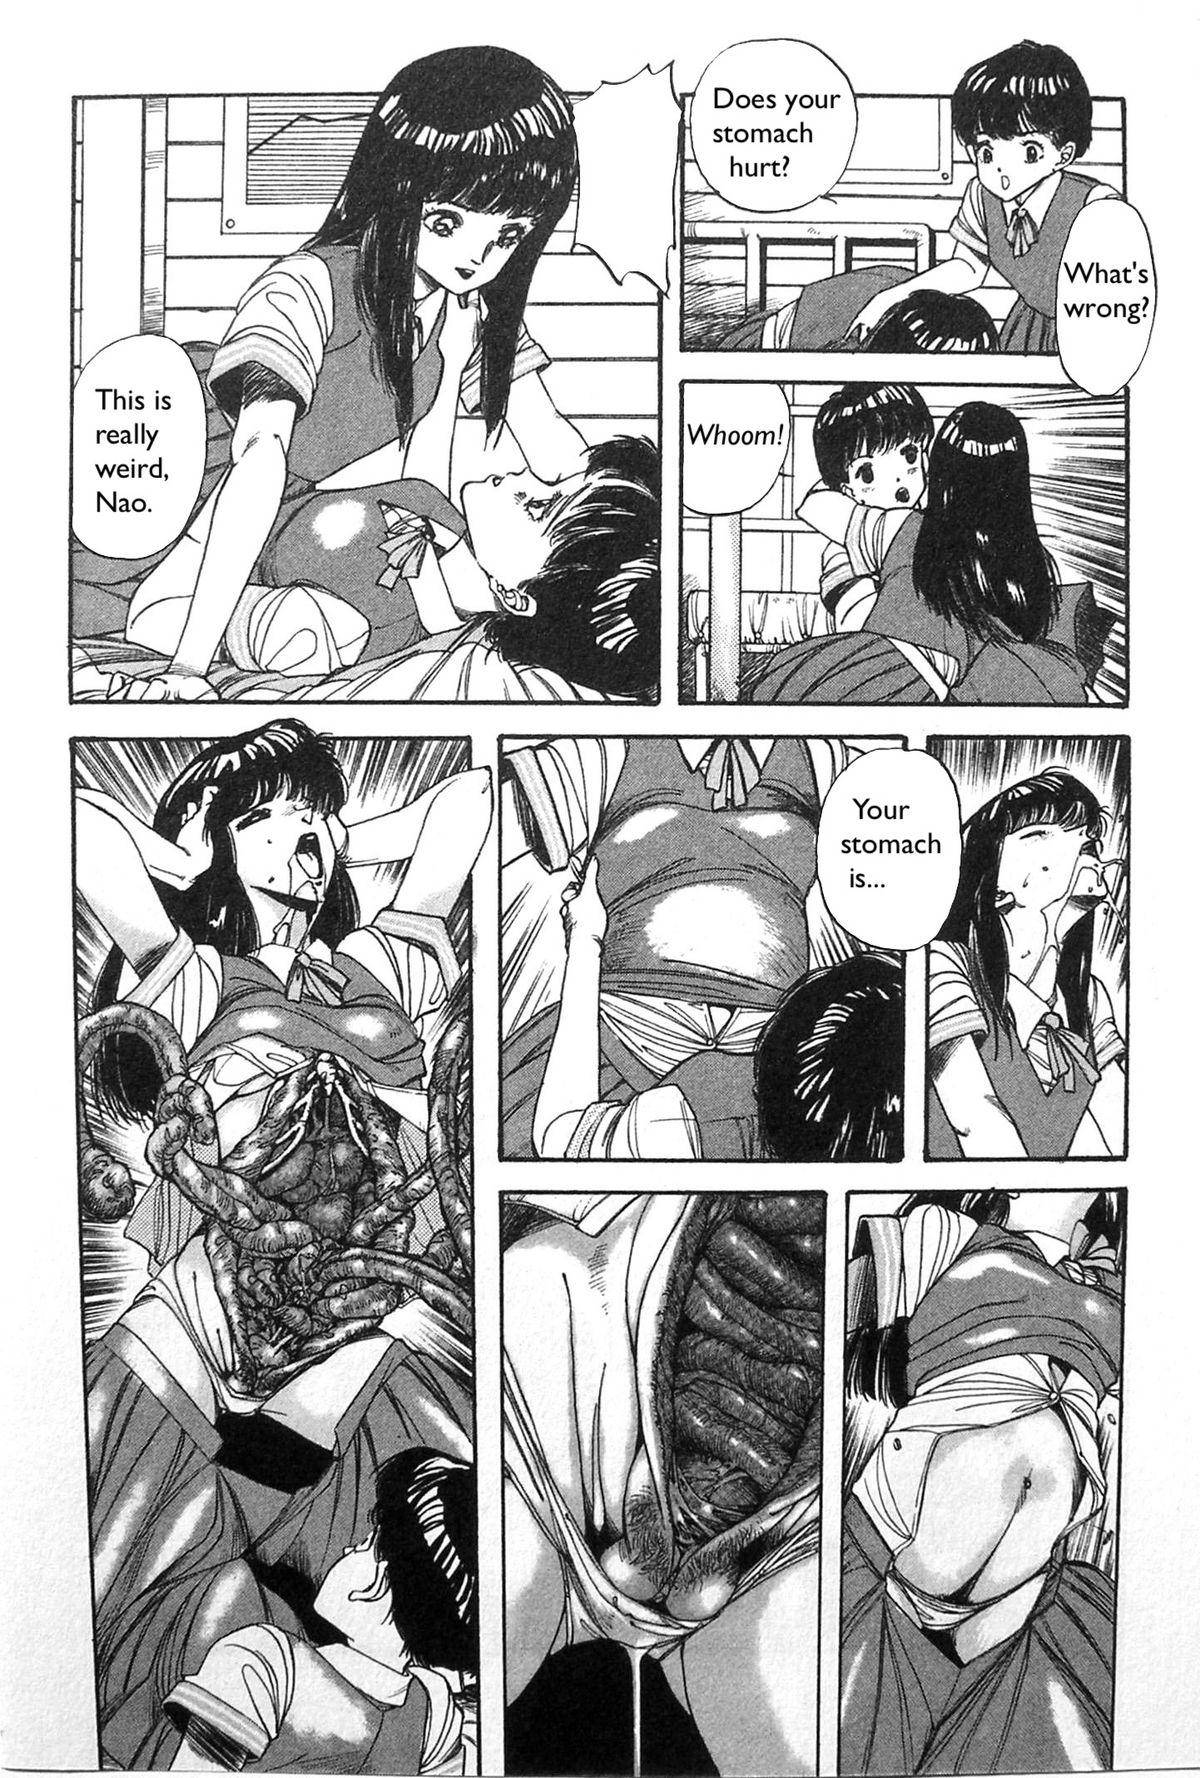 Toys Himei-Saka Slope of the Scream | Screaming Hill Menage - Page 8